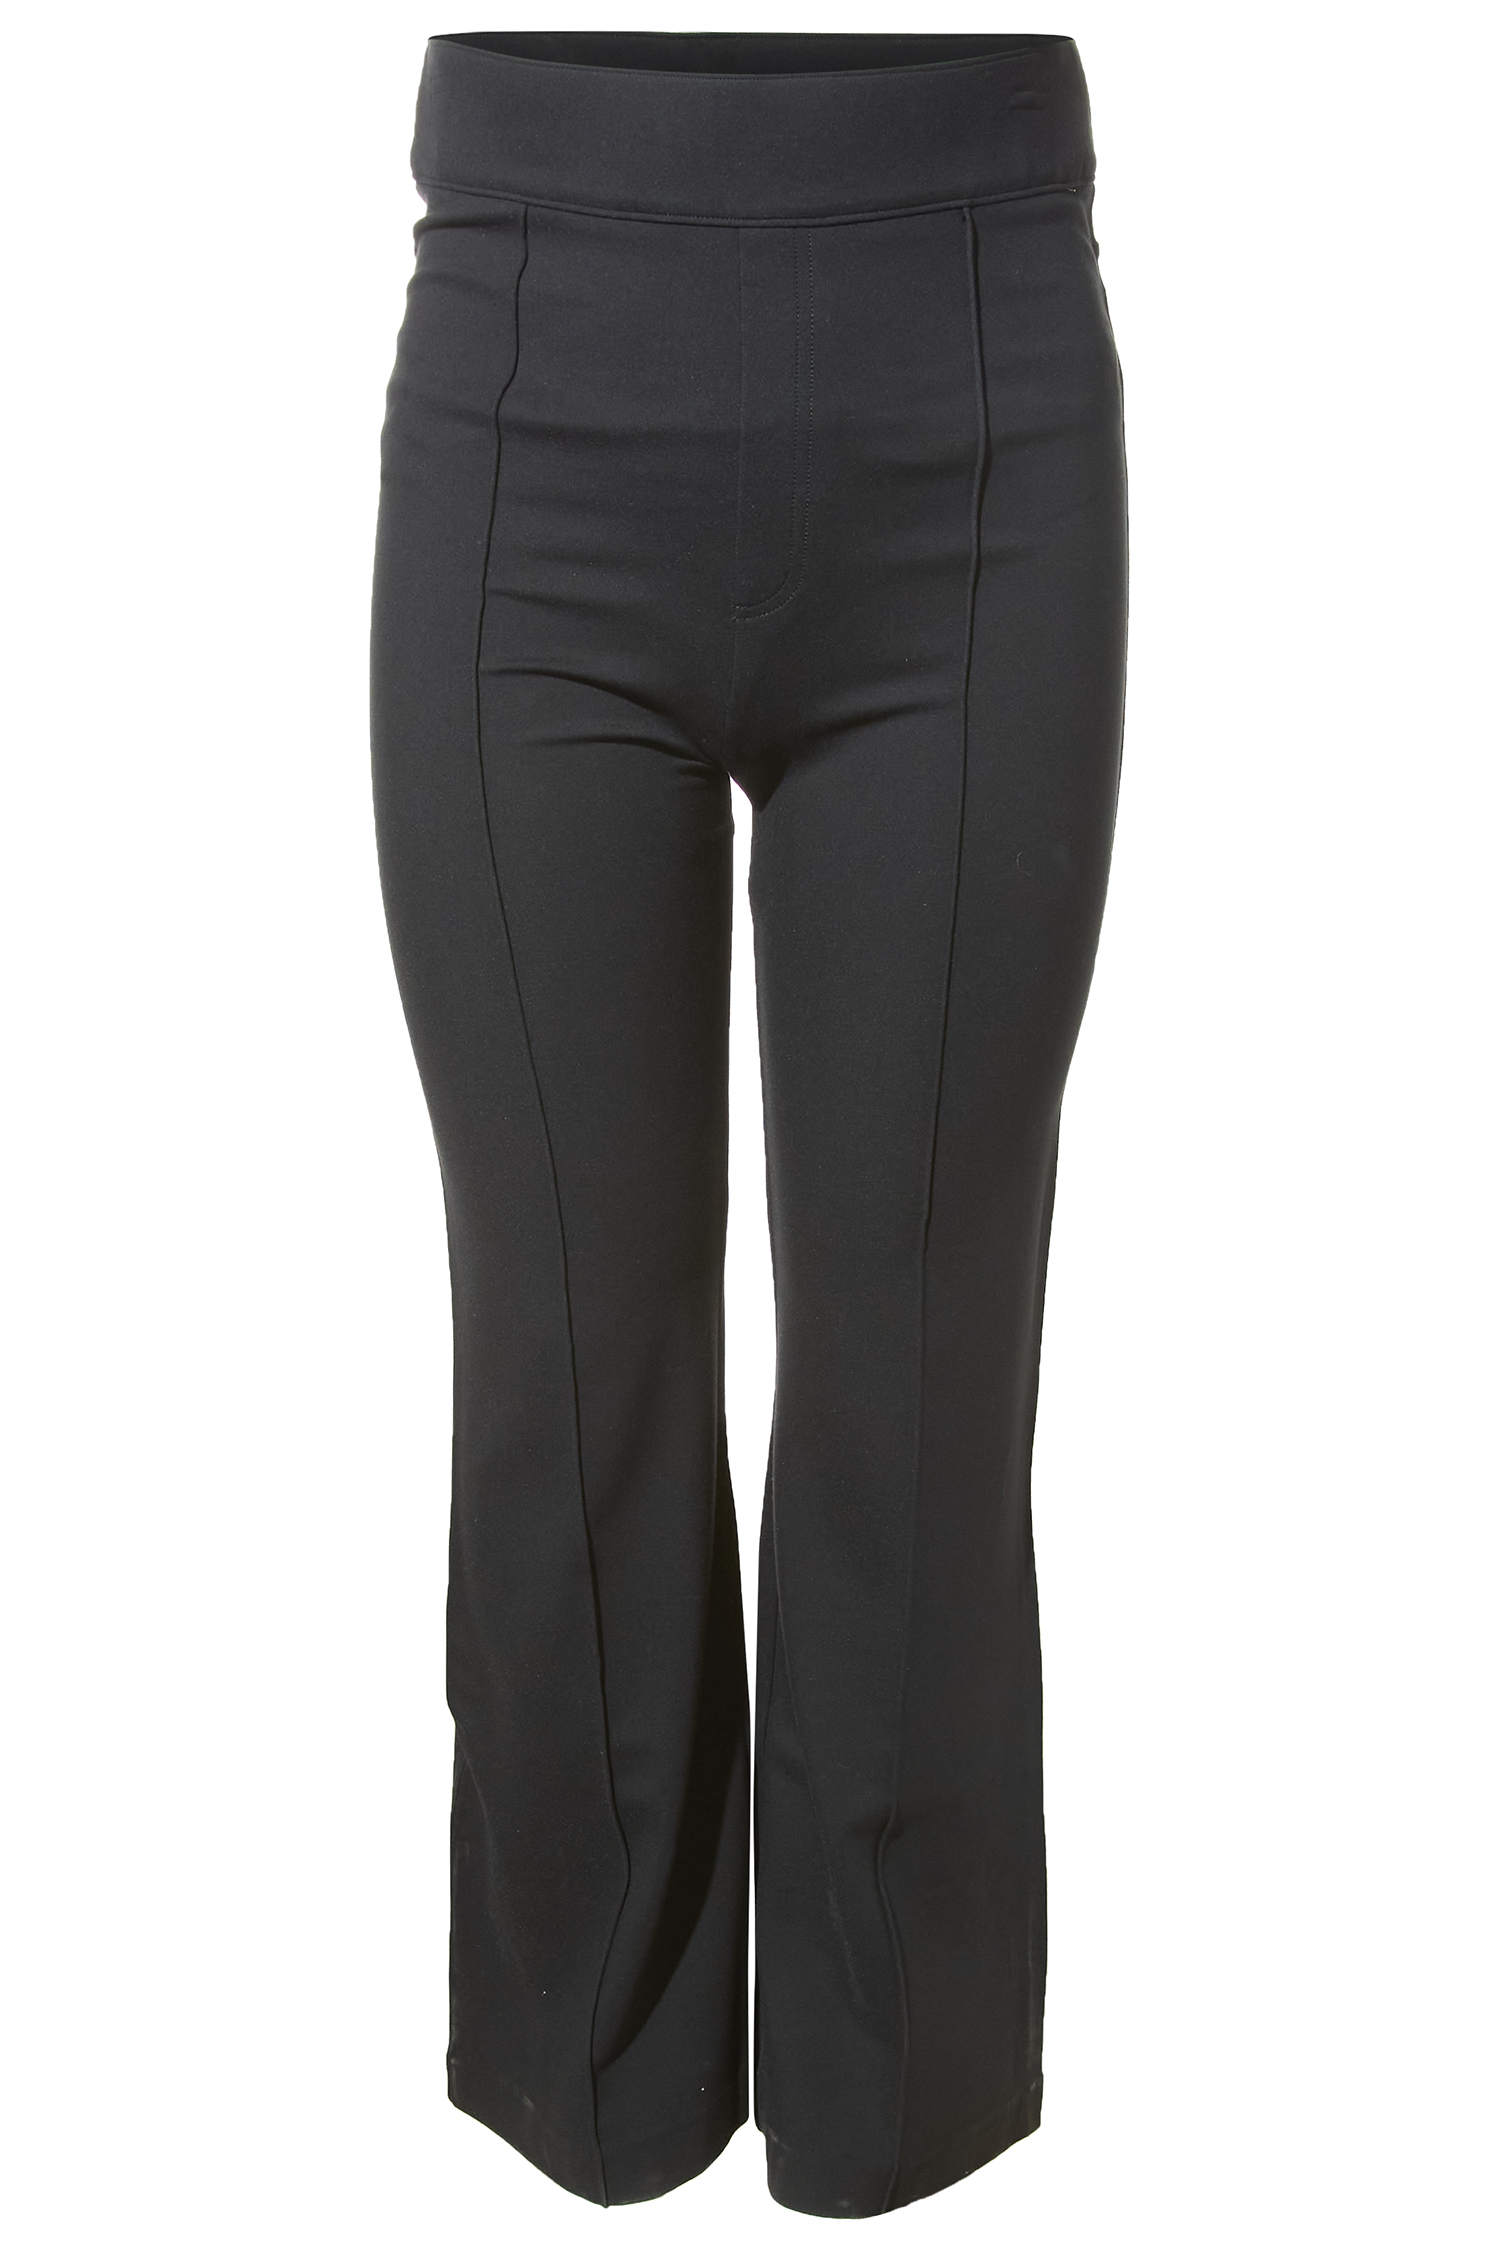 Spanx High Rise Flare Pant